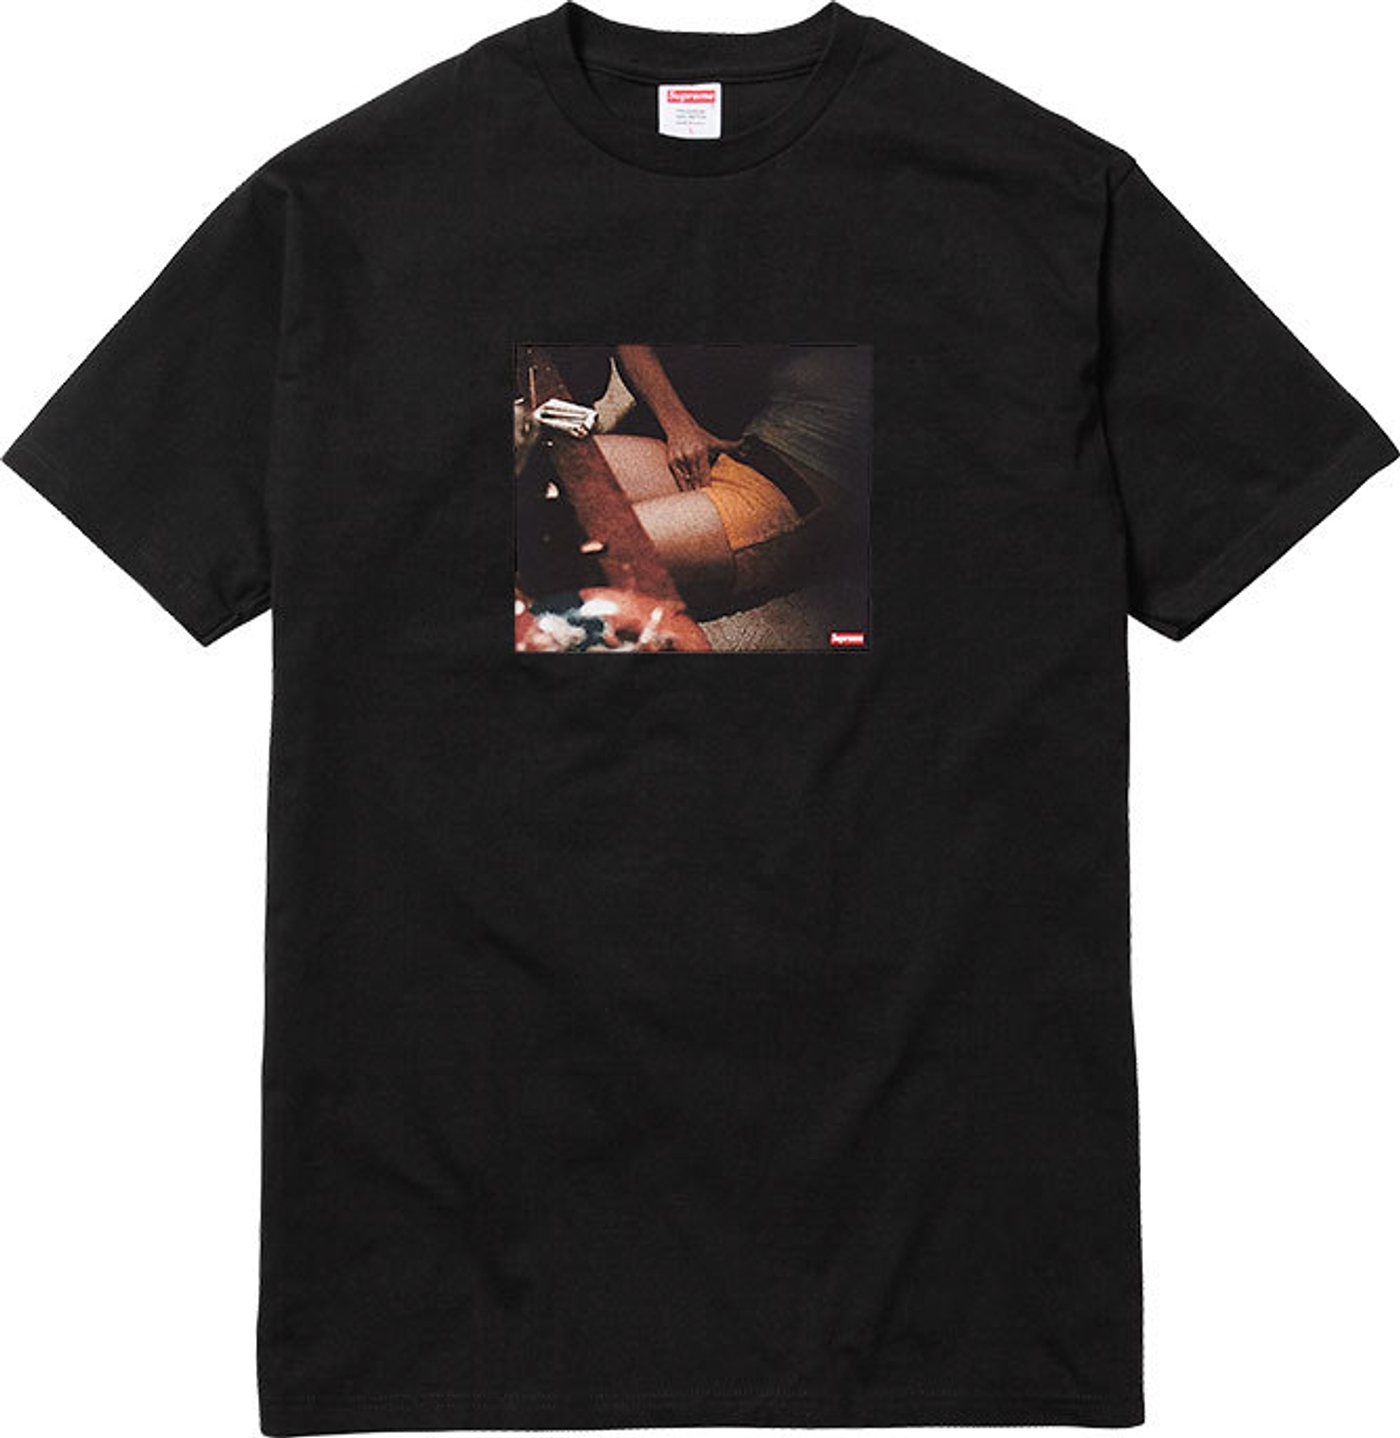 Make Out Tee 
Larry Clark for Supreme (9/13)